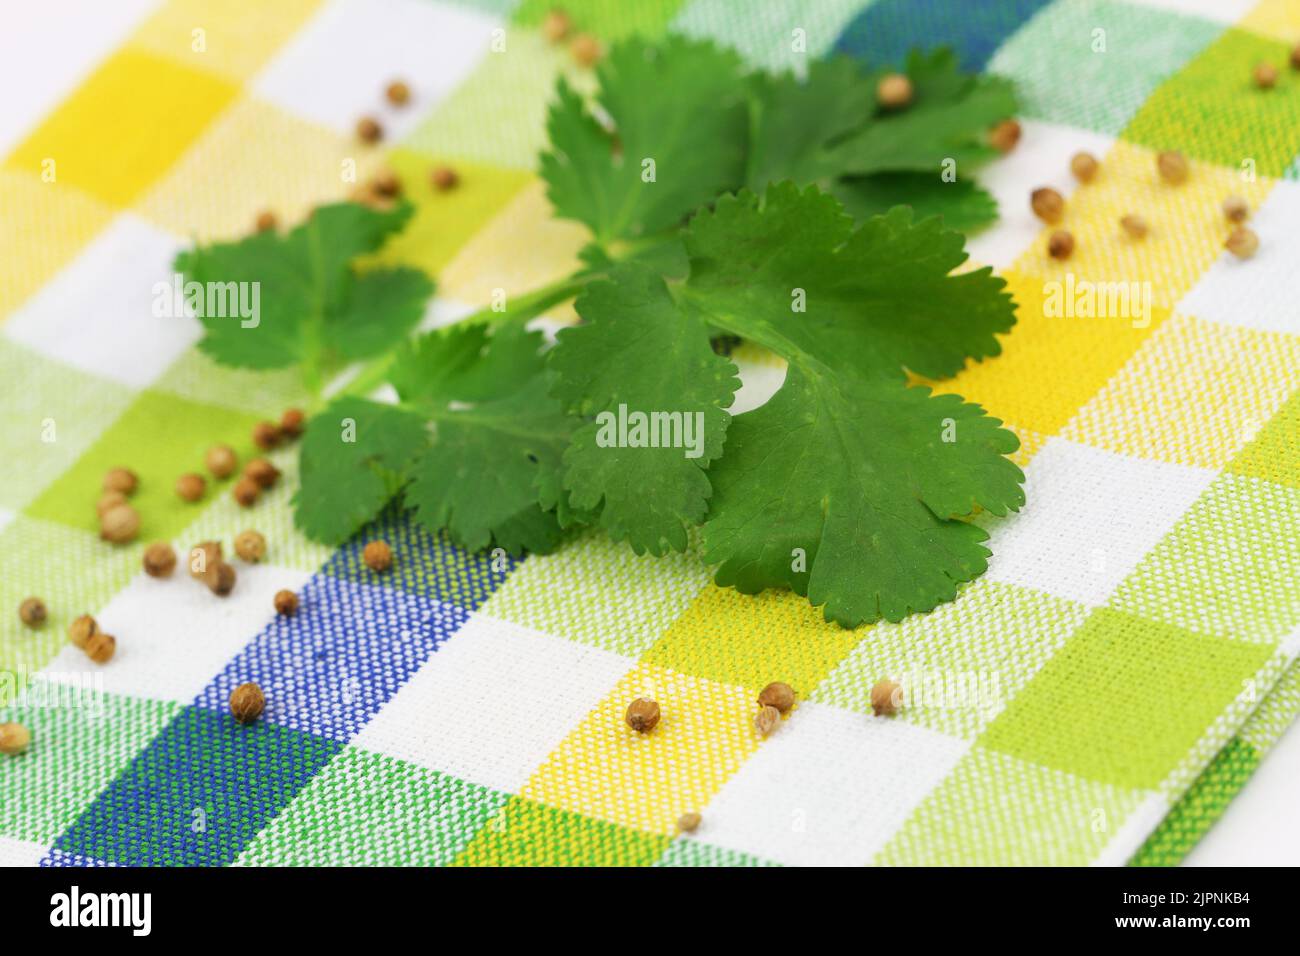 Coriander seeds and fresh coriander leaves on colorful kitchen cloth Stock Photo